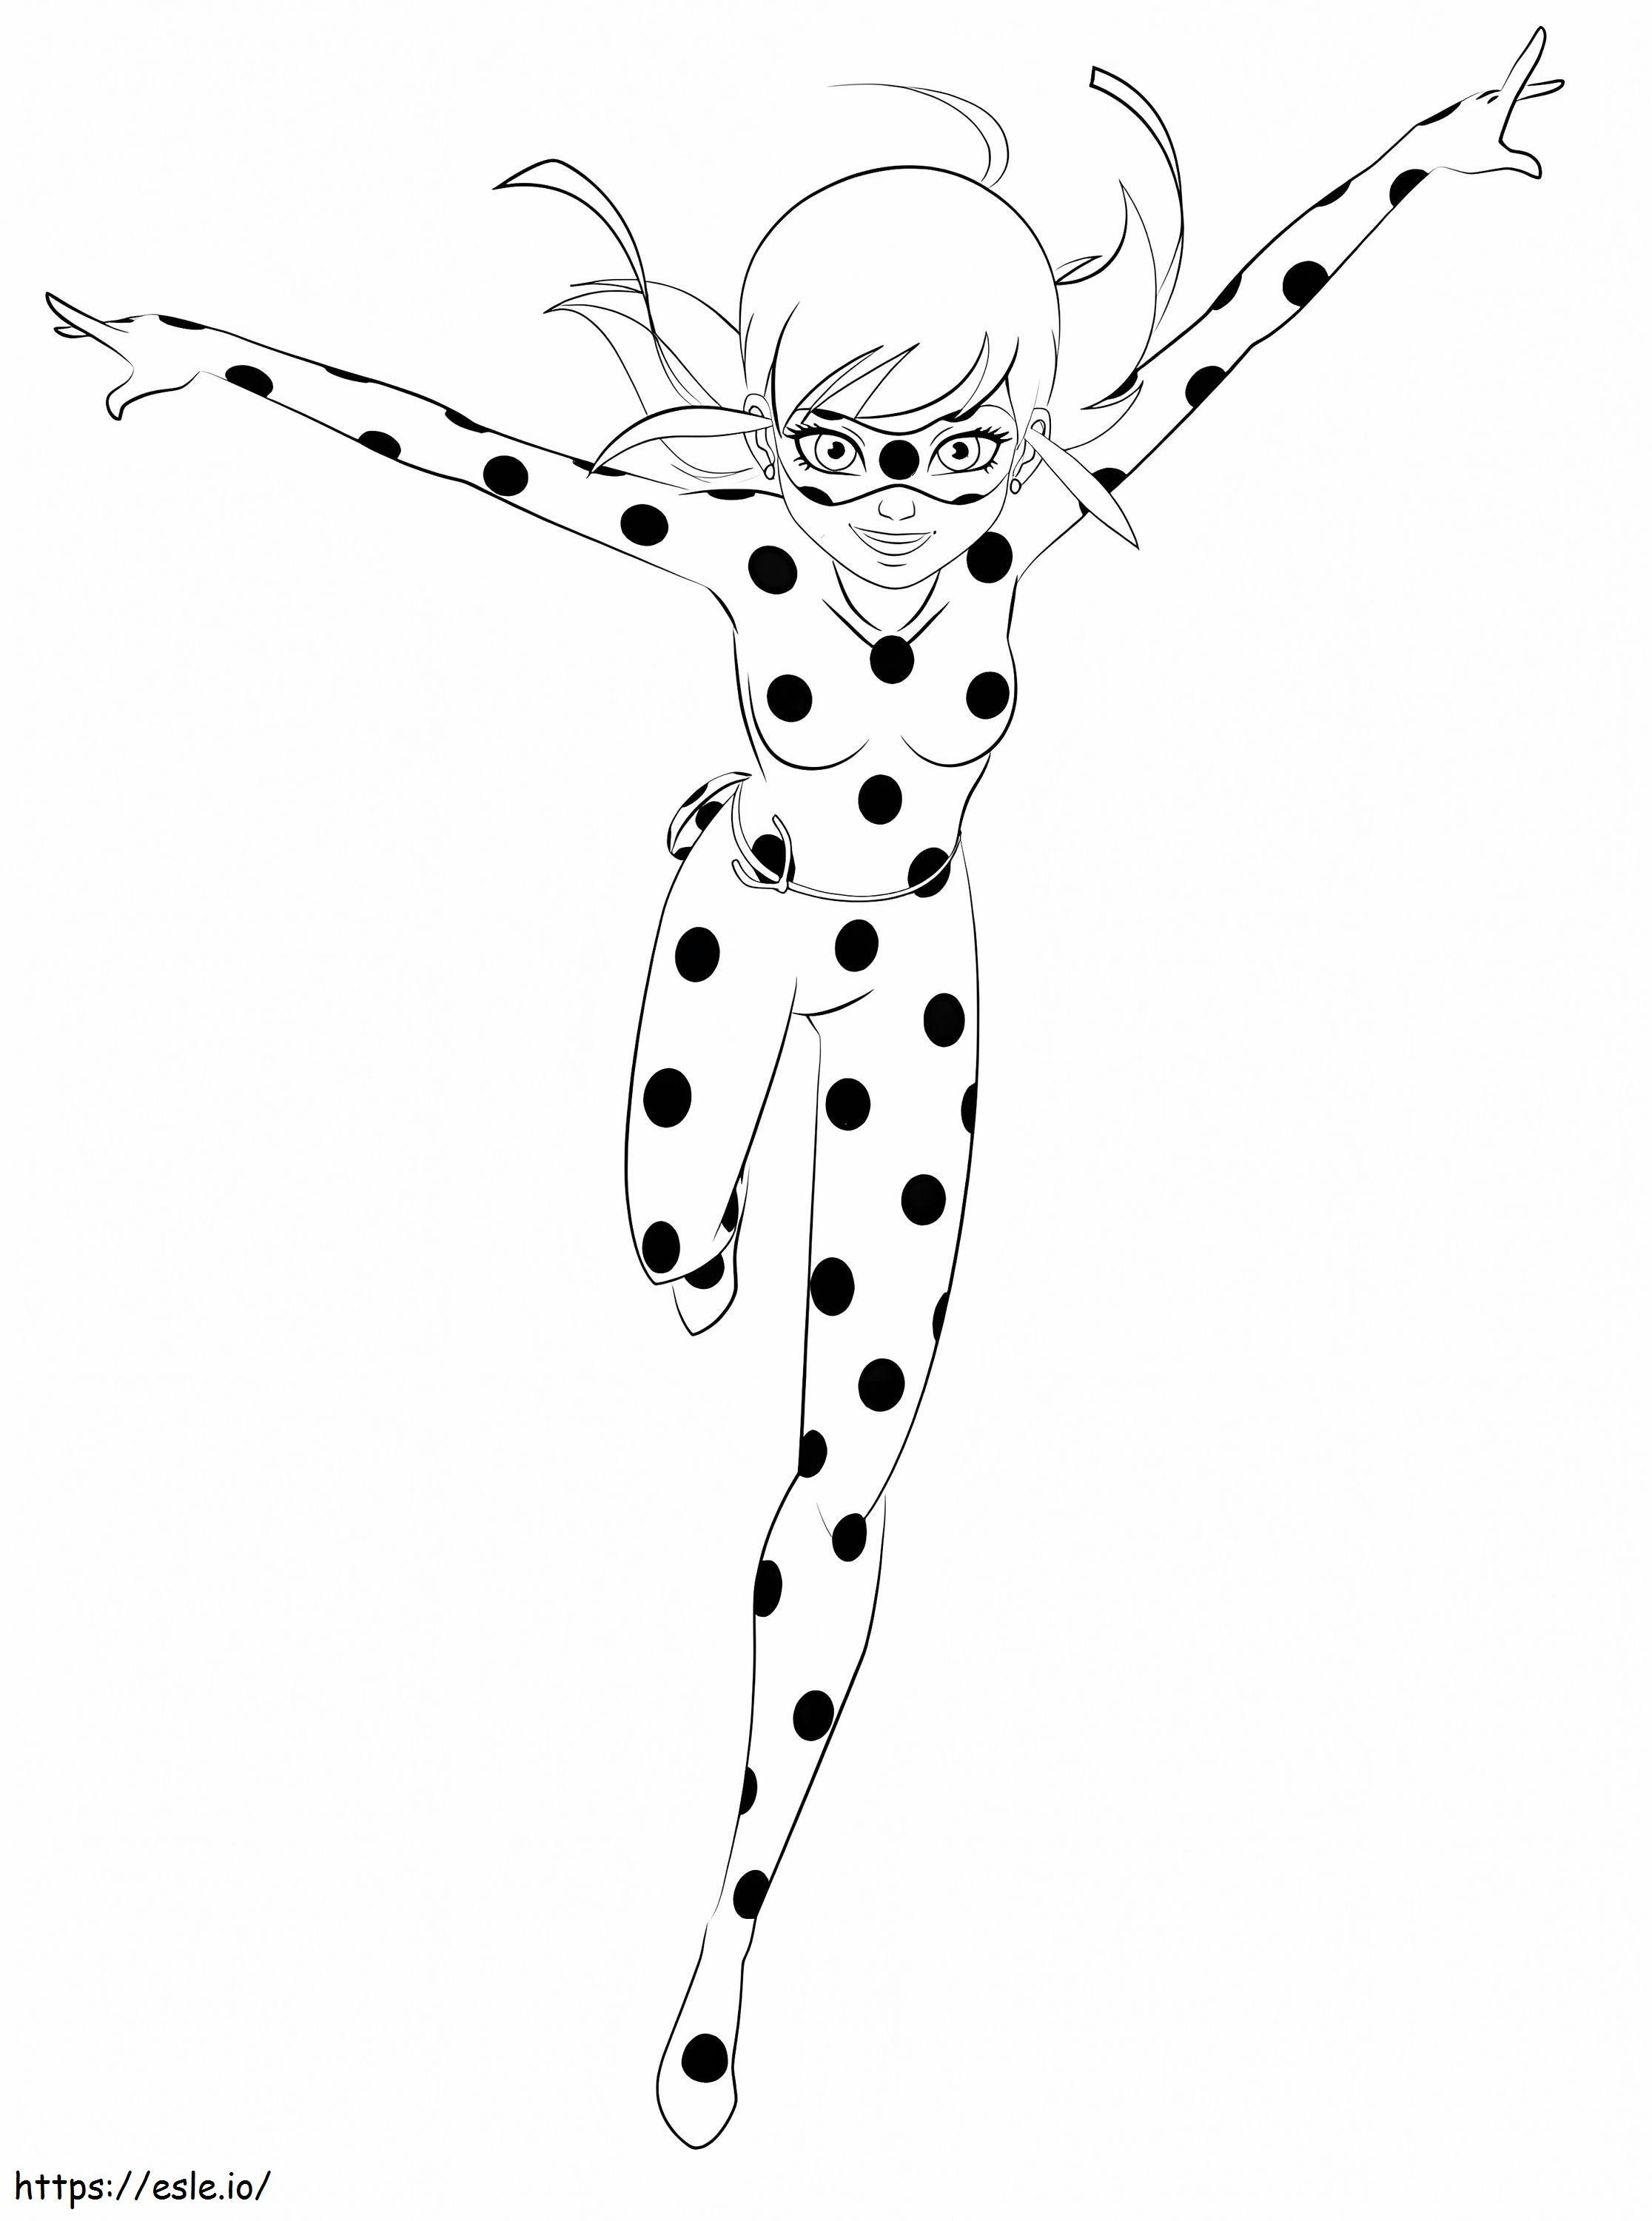 Free Miraculous Ladybug coloring page